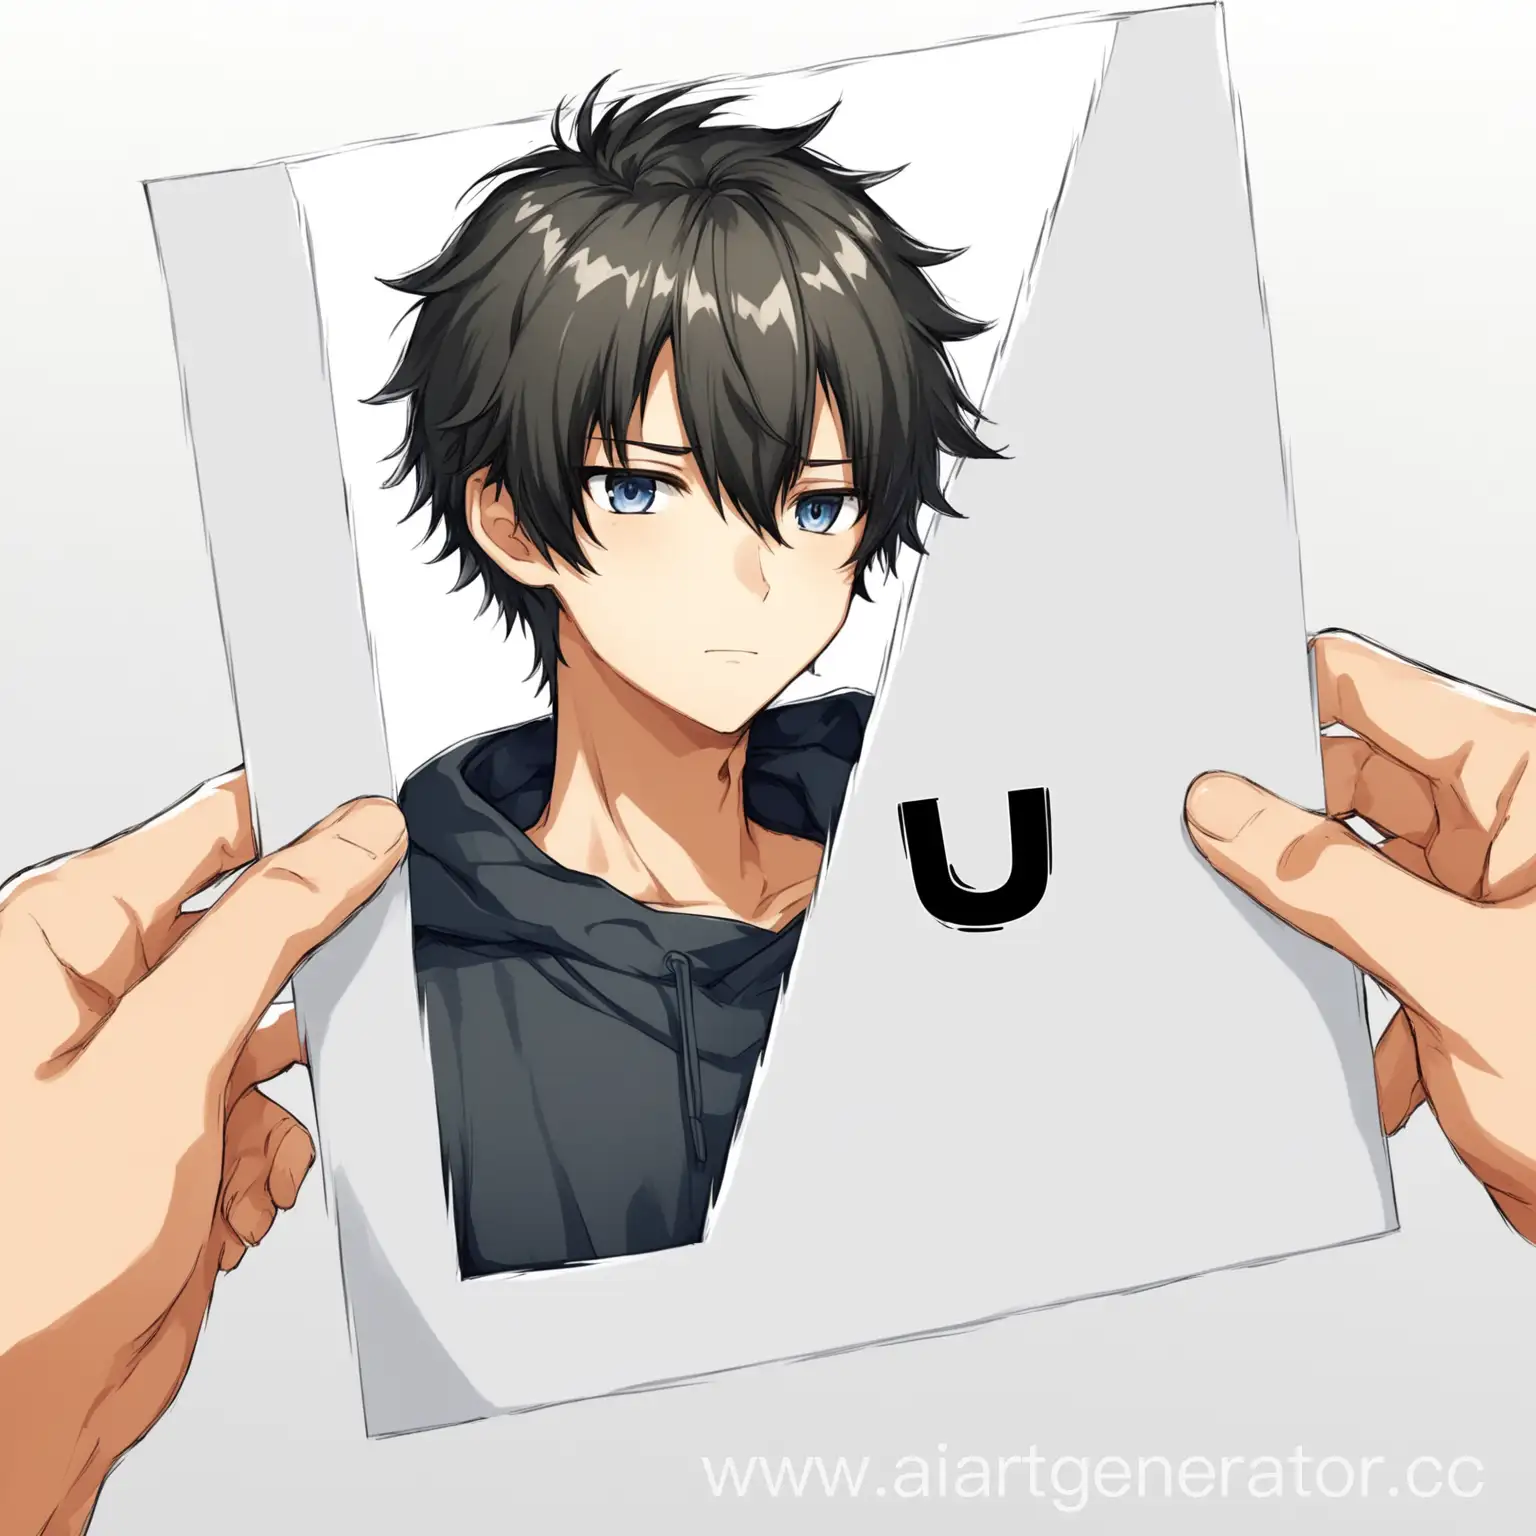 Anime boy art, white background, use the letter 'U' to make it fit harmoniously with the art